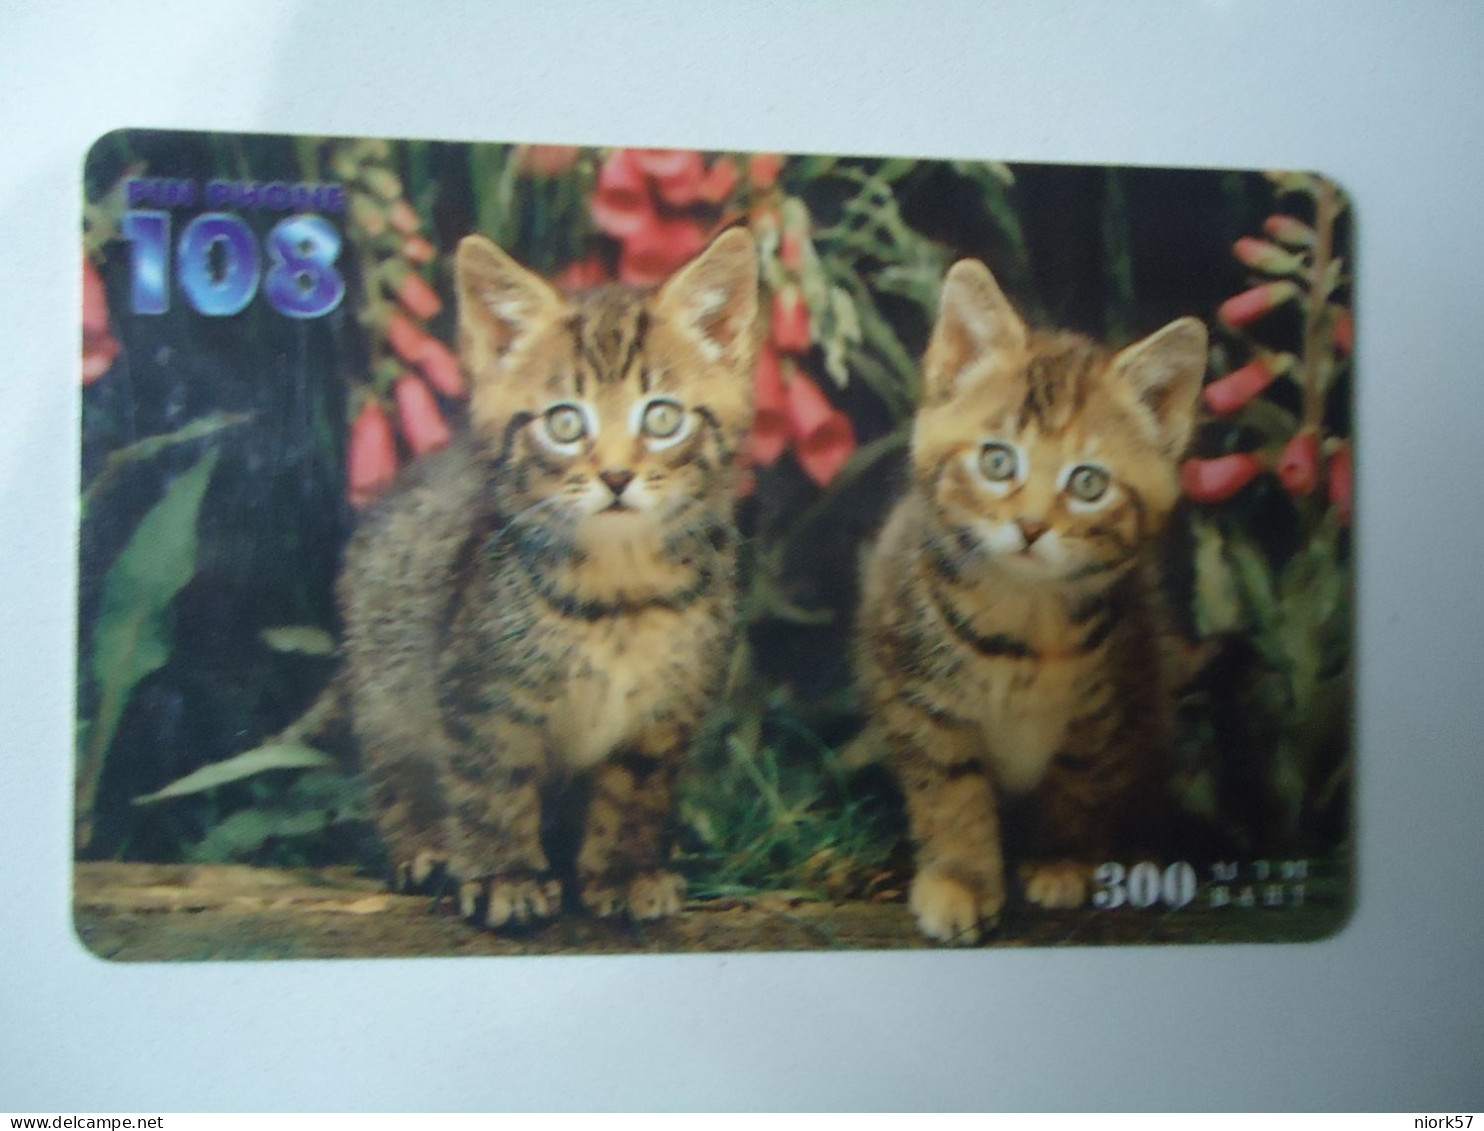 THAILAND USED  CARDS PIN 108 FLOWERS TREE  CATS UNITS 300 - Gatos